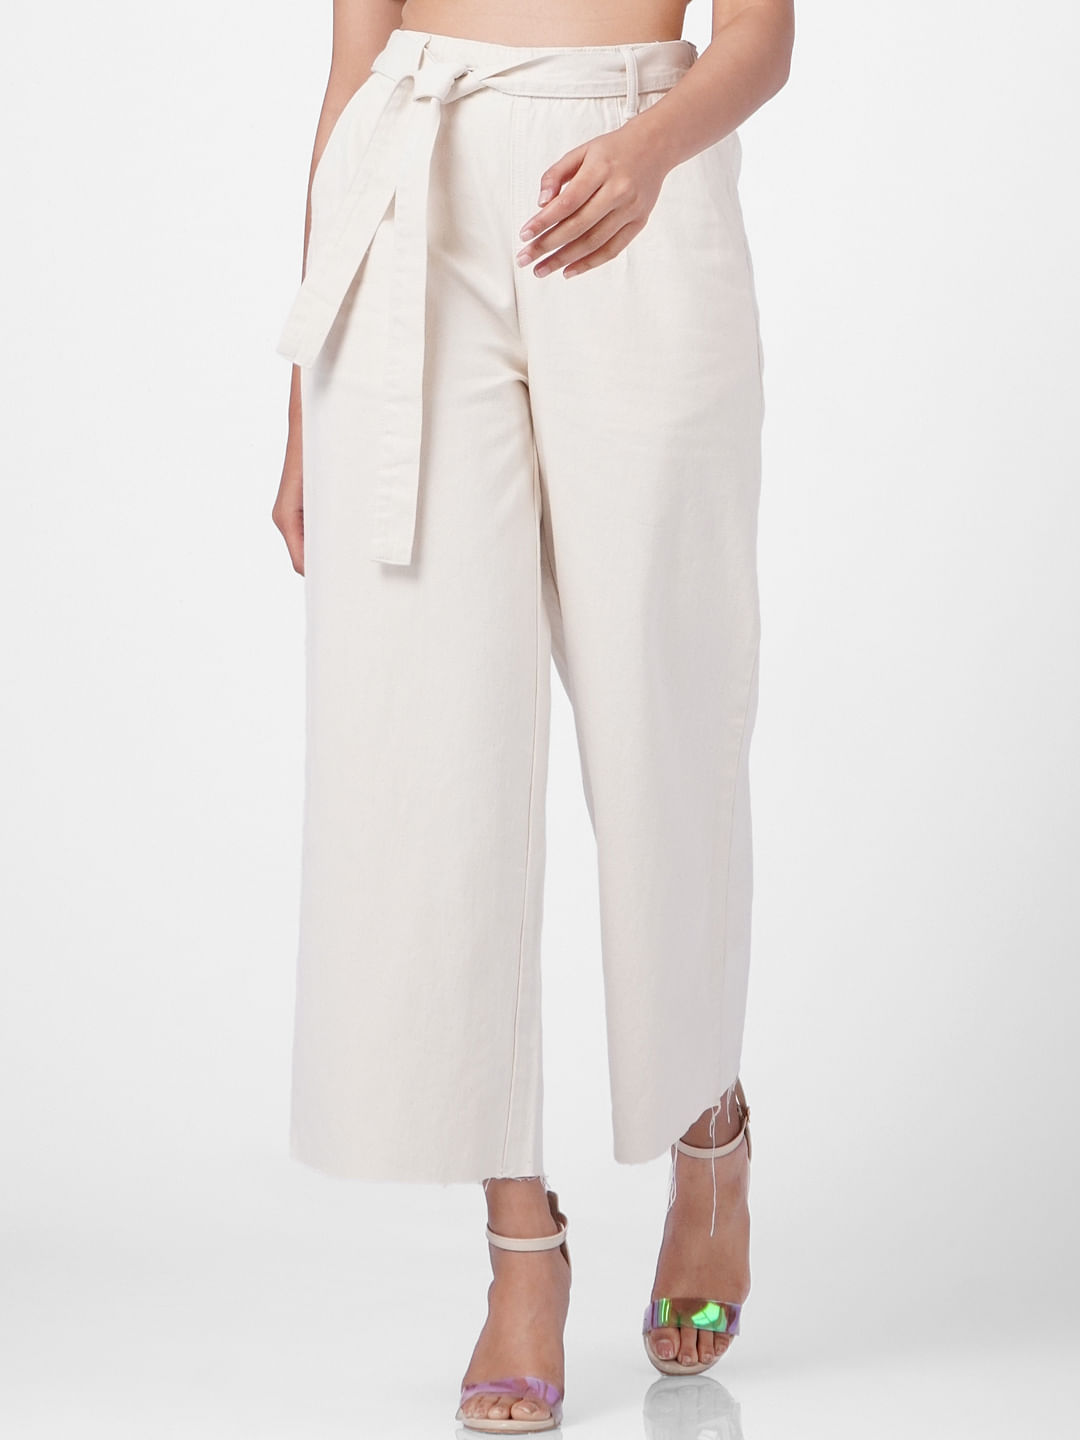 40 Amazing White Wide Leg Pants Outfit Ideas to Try This Summer  See ALL  outfits at Lovika  White culottes Leg pants outfit Fashion